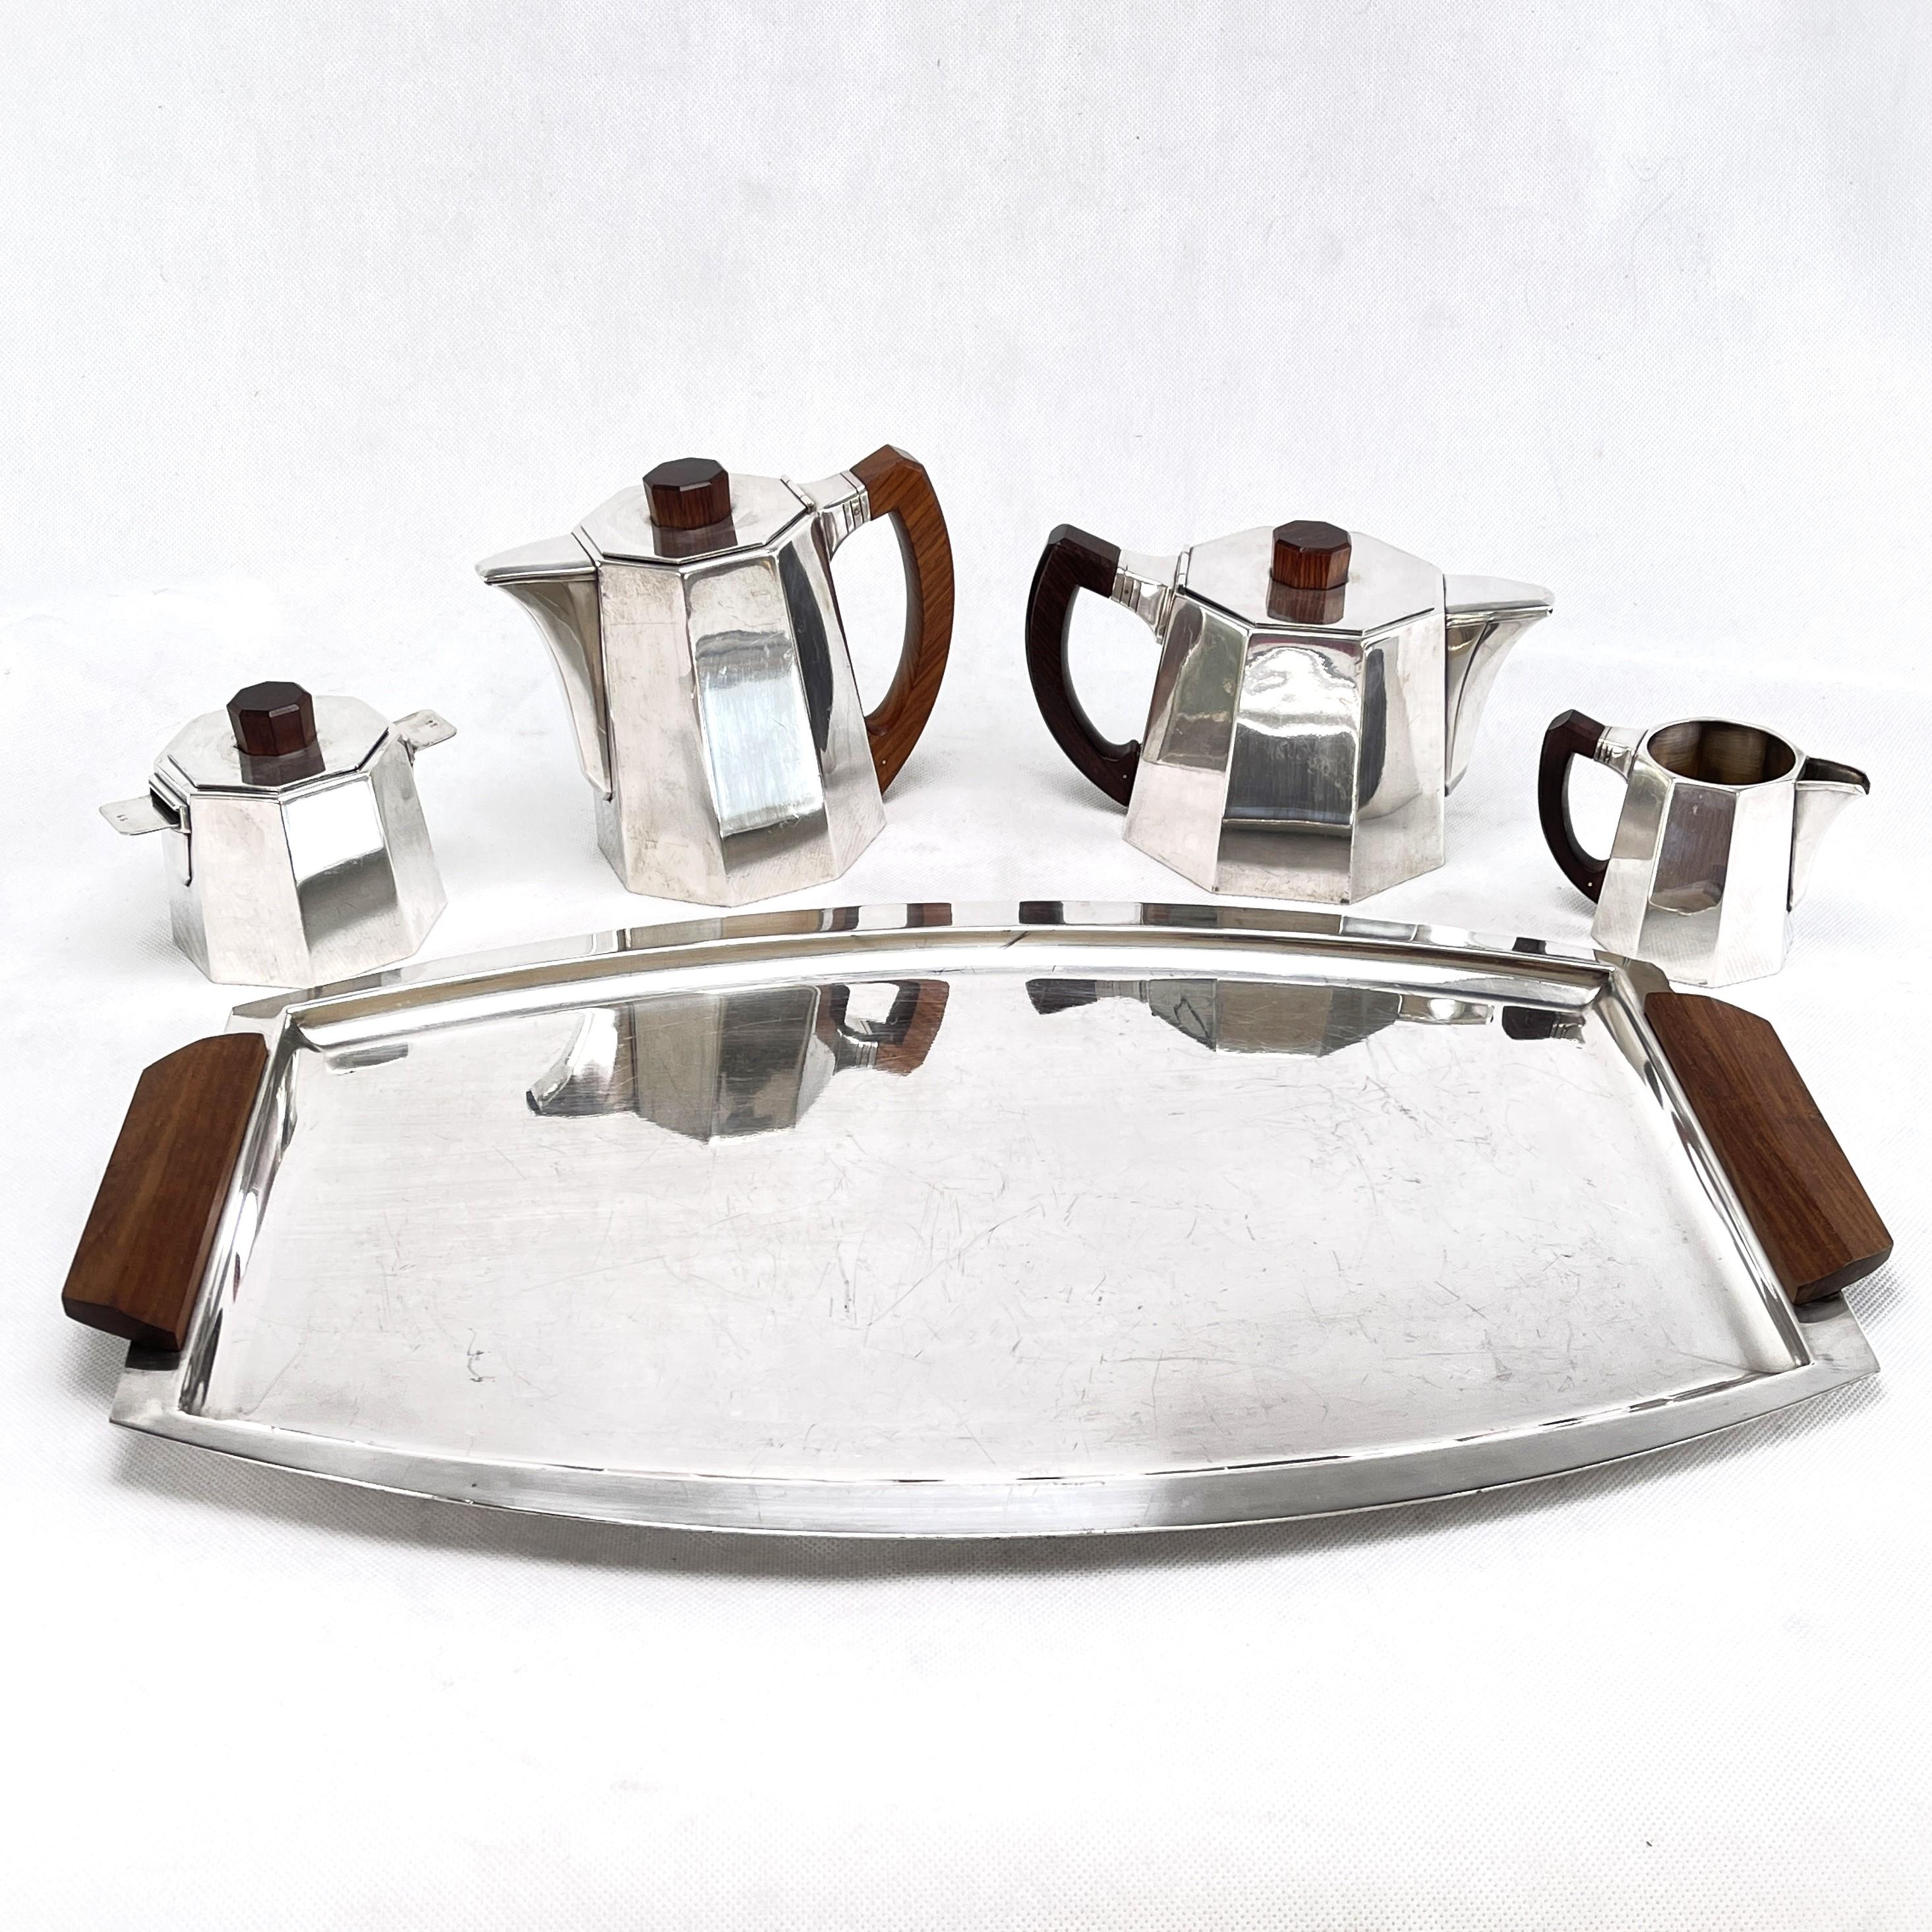 Coffee/tea set - 1930s

This coffee set from the 1930s is in the typical style of the streamline modern. It includes a coffee pot, teapot, sugar bowl, creamer and a handled tray.

The mesures only refer to the handled tray.

Further mesures:

Coffee